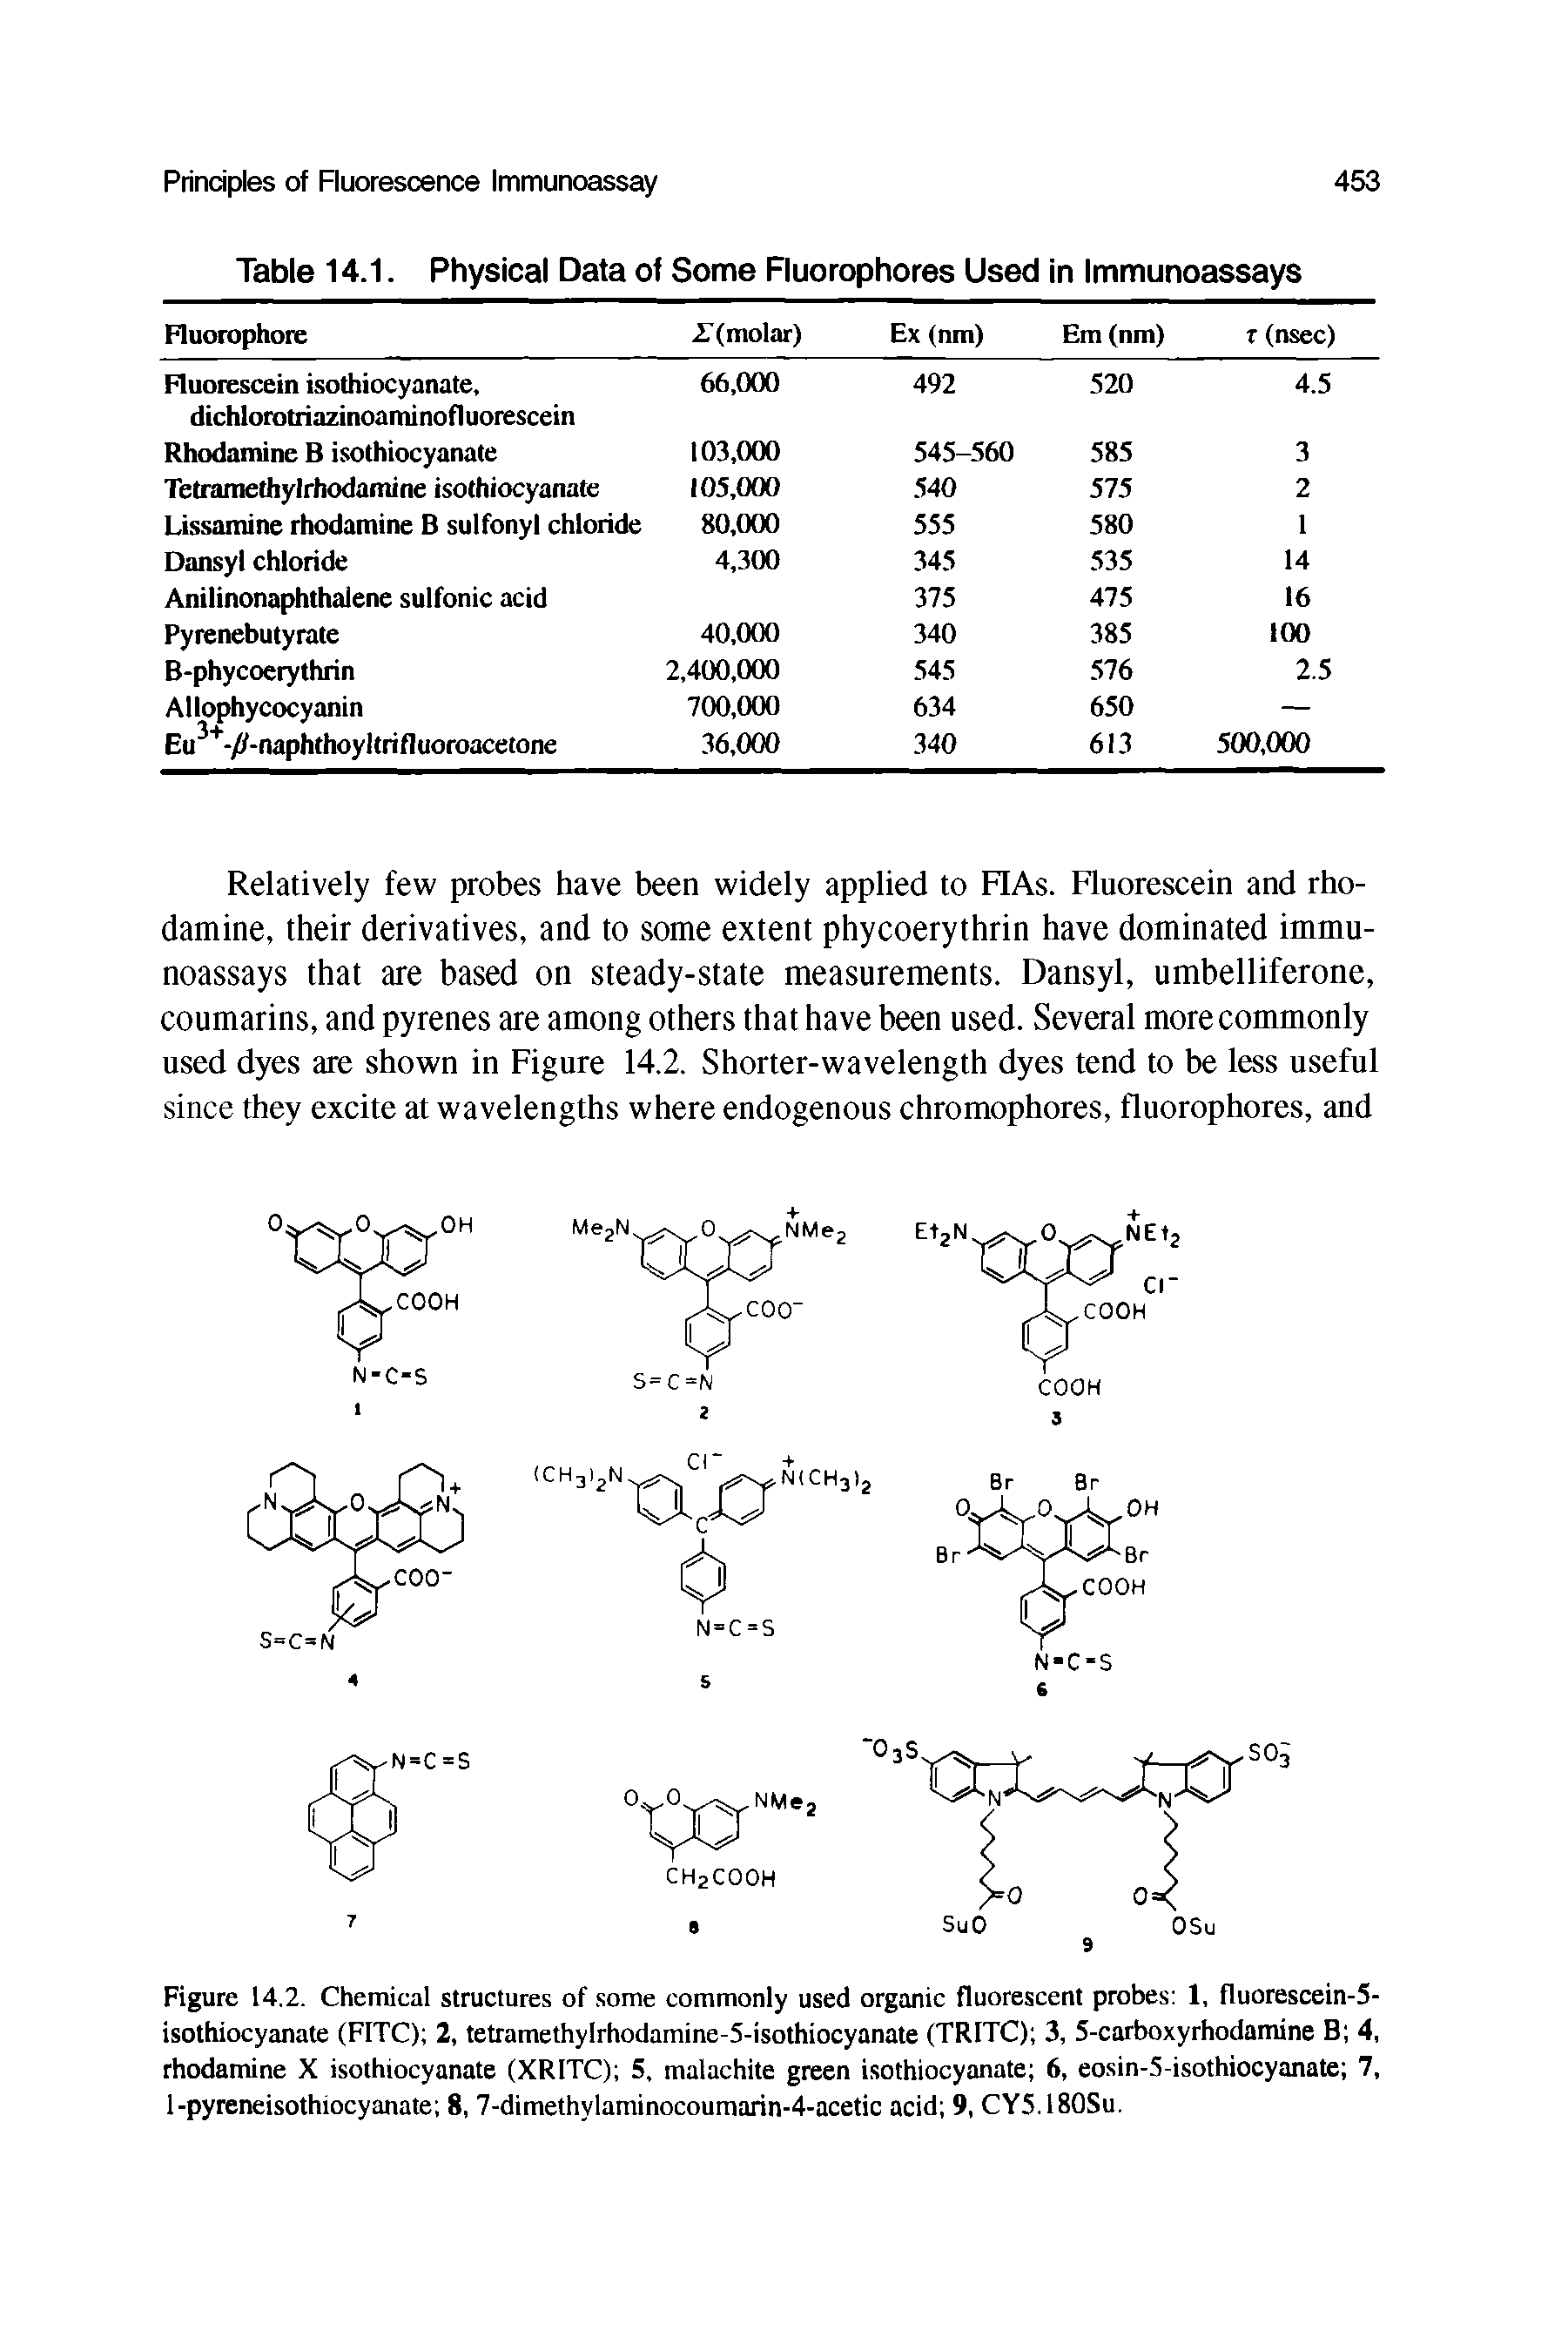 Figure 14.2. Chemical structures of some commonly used organic fluorescent probes 1, fluorescein-5-isothiocyanate (FITC) 2, tetramethylrhodamine-5-isothiocyanate (TRITC) 3, 5-carboxyrhodamine B 4, rhodamine X isothiocyanate (XRITC) 5, malachite green isothiocyanate 6, eosin-5-isothiocyanate 7, 1-pyreneisothiocyanate 8, 7-dimethylaminocoumarin-4-acetic acid 9, CY5.180Su.